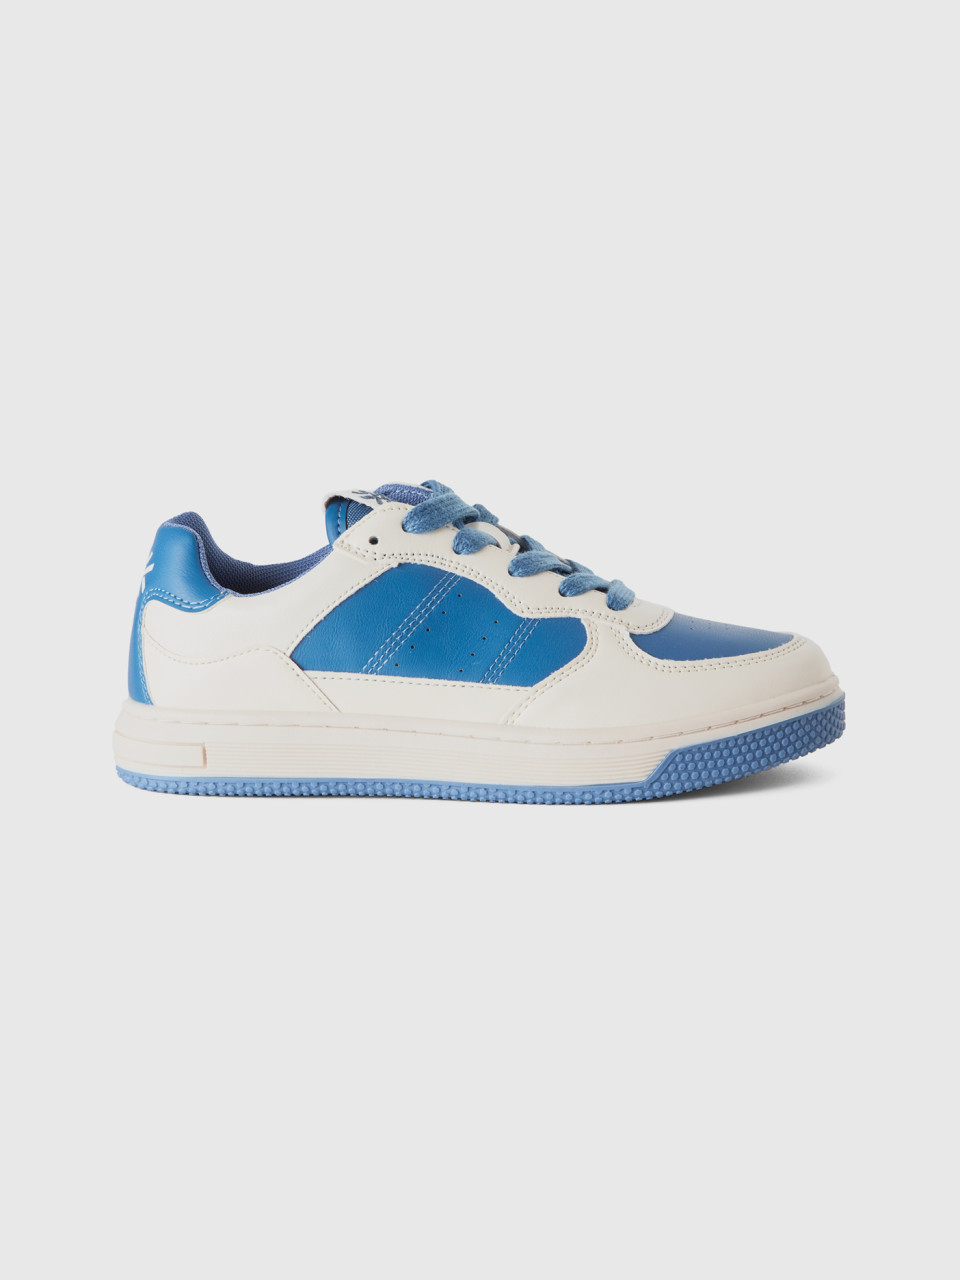 Benetton, Low-top Sneakers In Imitation Leather, Blue, Kids